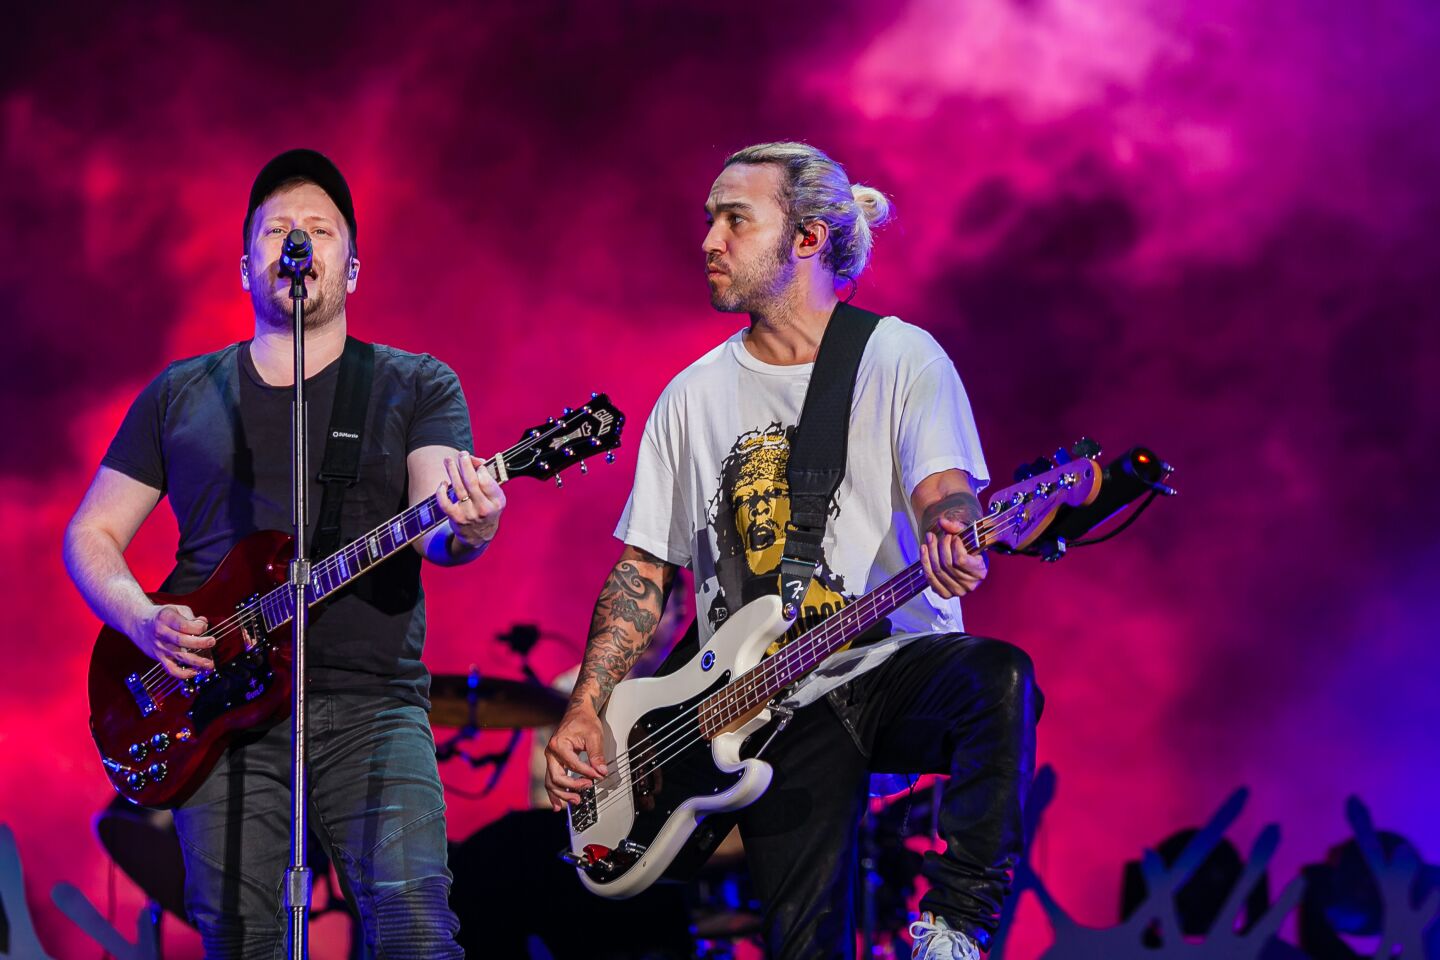 Singer Patrick Stump and Bassist Pete Wentz of Fall Out Boy during the Hella Mega Tour in downtown San Diego on August 29, 2021.